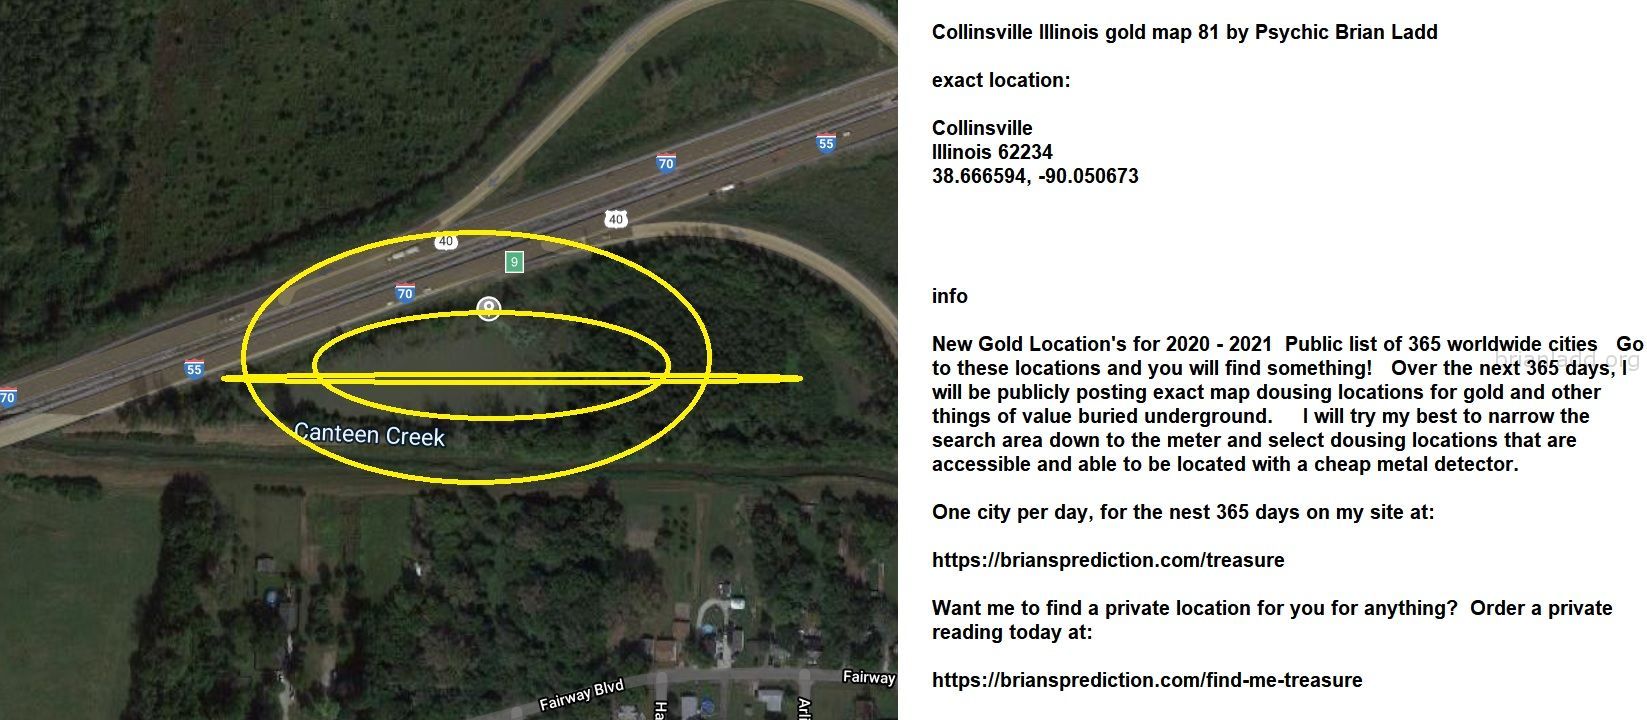 Collinsville Illinois gold map 81 by Psychic Brian Ladd
New Gold Location's for 2020 - 2021  Public list of 365 worldwide cities   Go to these locations and you will find something!   Over the next 365 days, I will be publicly posting exact map dousing locations for gold and other things of value buried underground.     I will try my best to narrow the search area down to the meter and select dousing locations that are accessible and able to be located with a cheap metal detector. One city per day, for the nest 365 days on my site at:  https://briansprediction.com/treasure  Want me to find a private location for you for anything?  Order a private reading today at:  https://briansprediction.com/find-me-treasure
